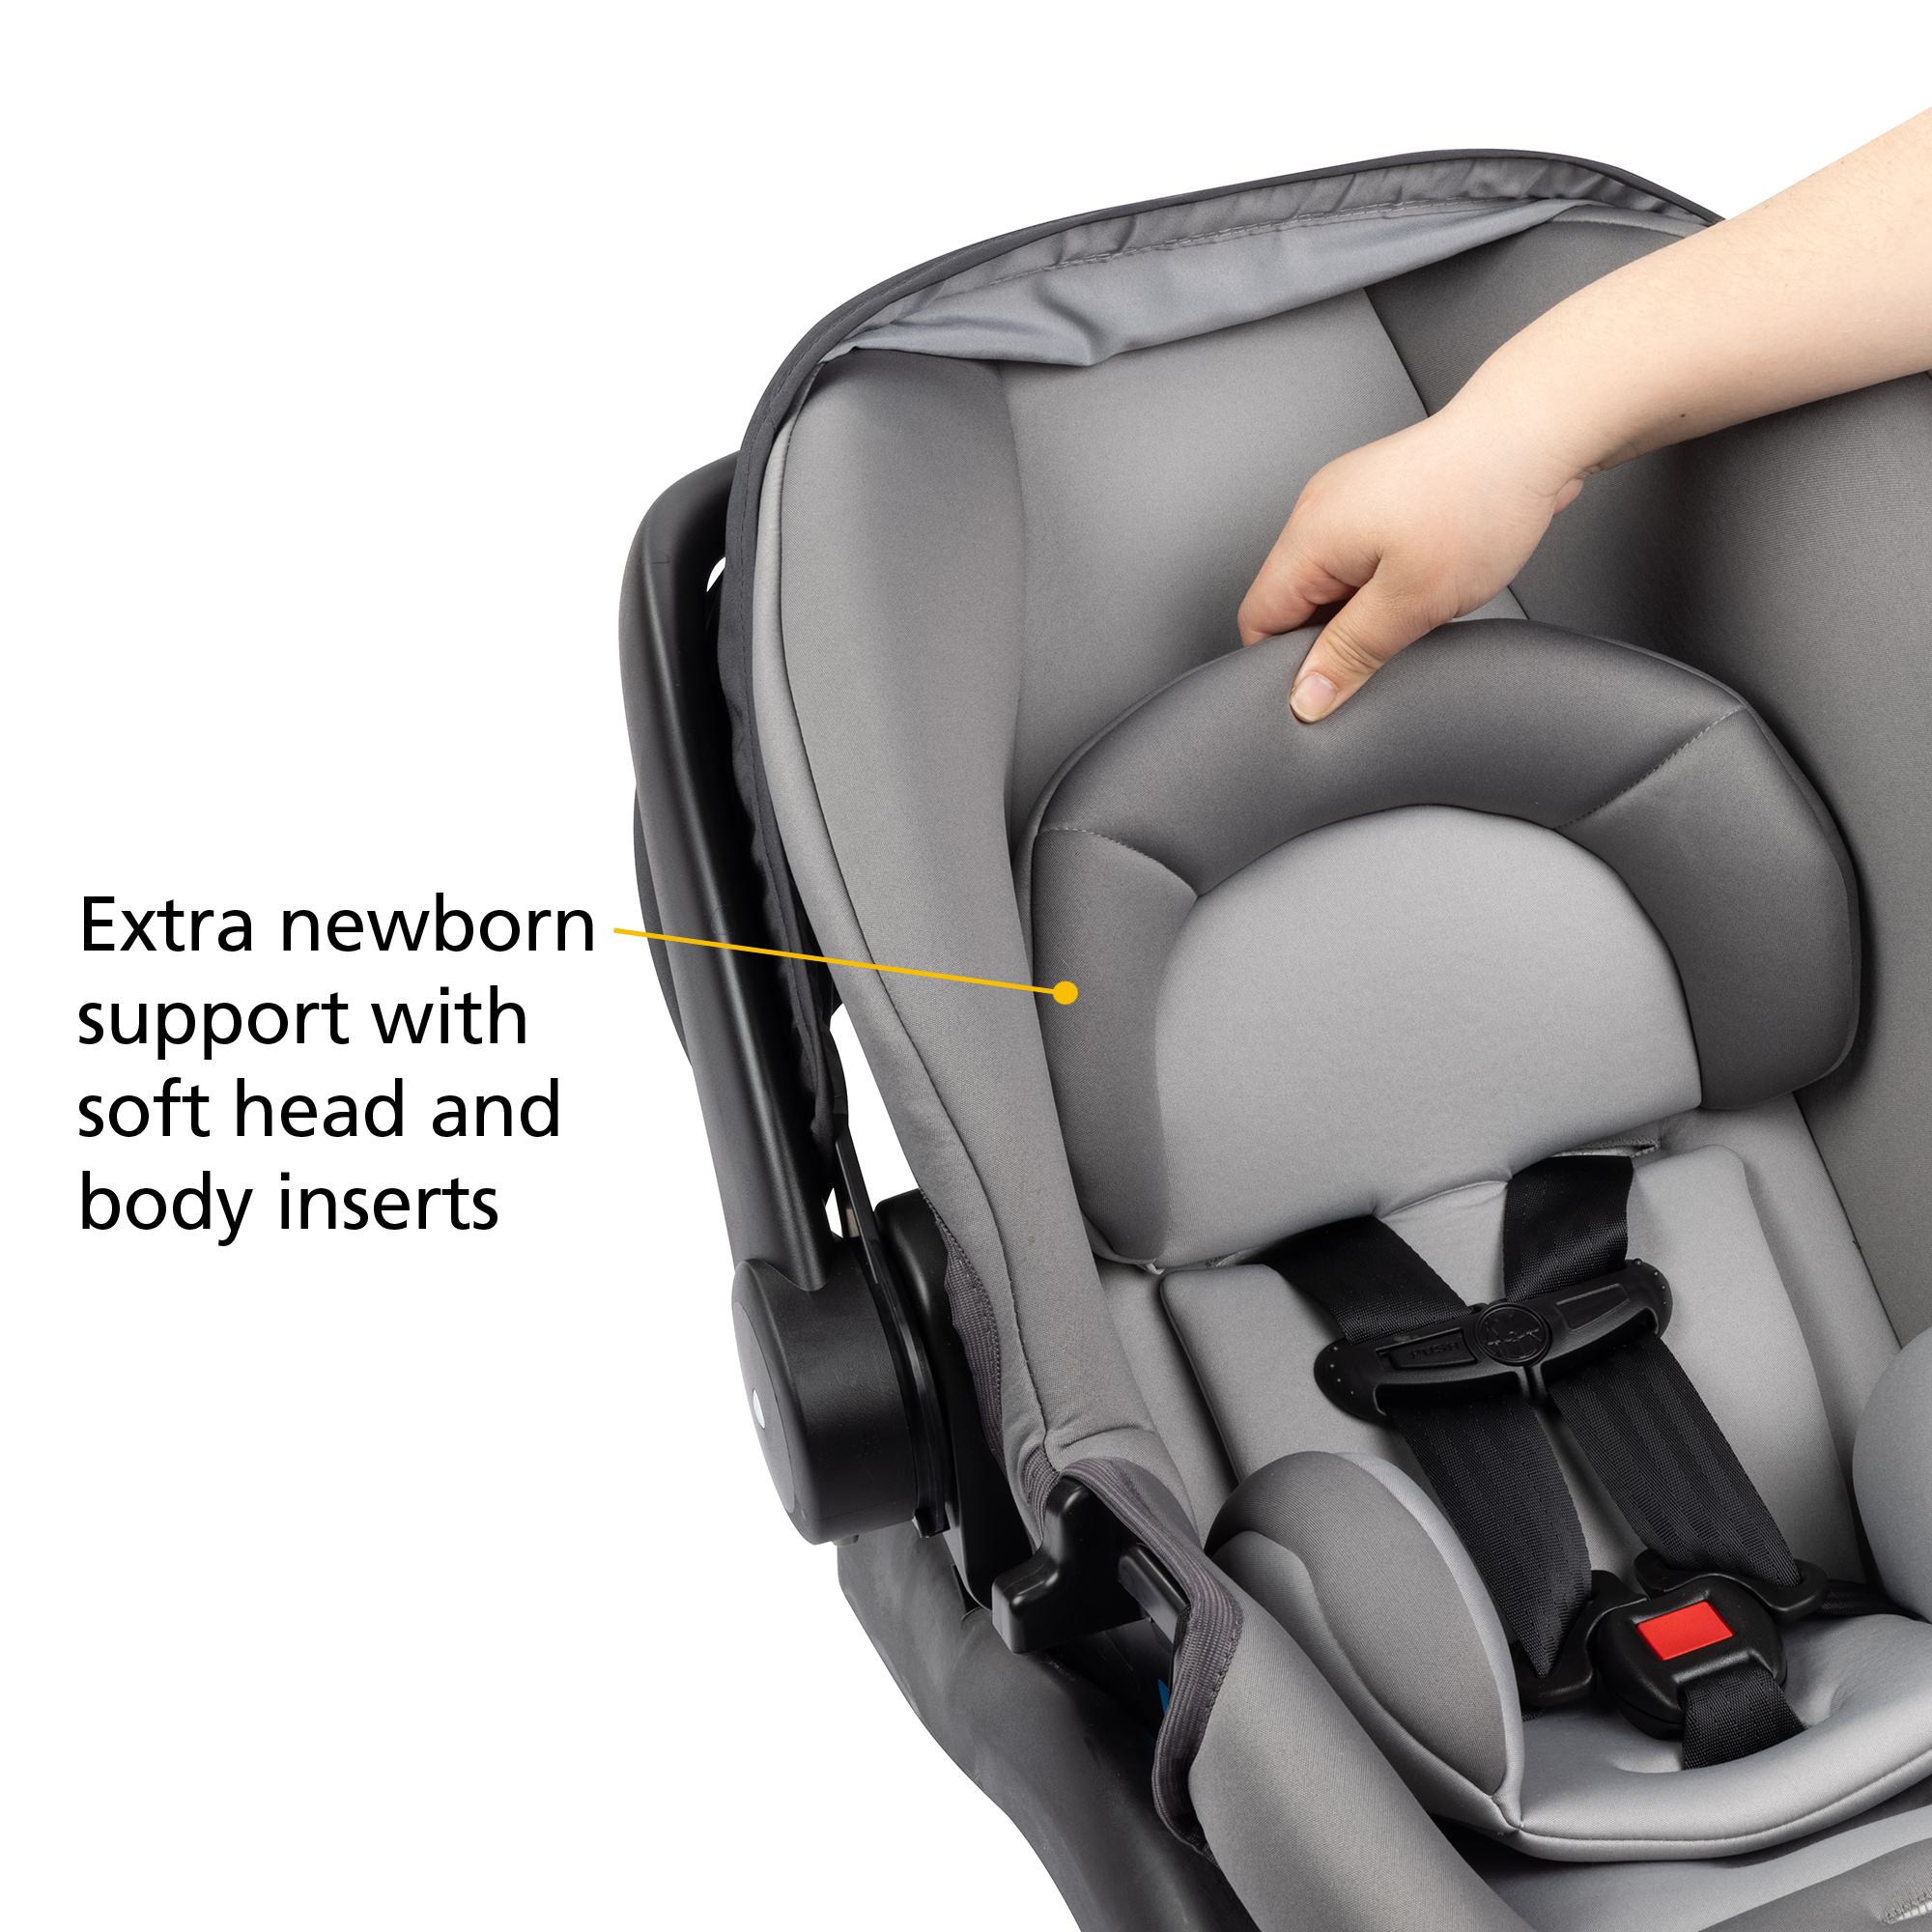 onBoard™35 SecureTech™ Infant Car Seat - extra newborn support with soft head and body inserts